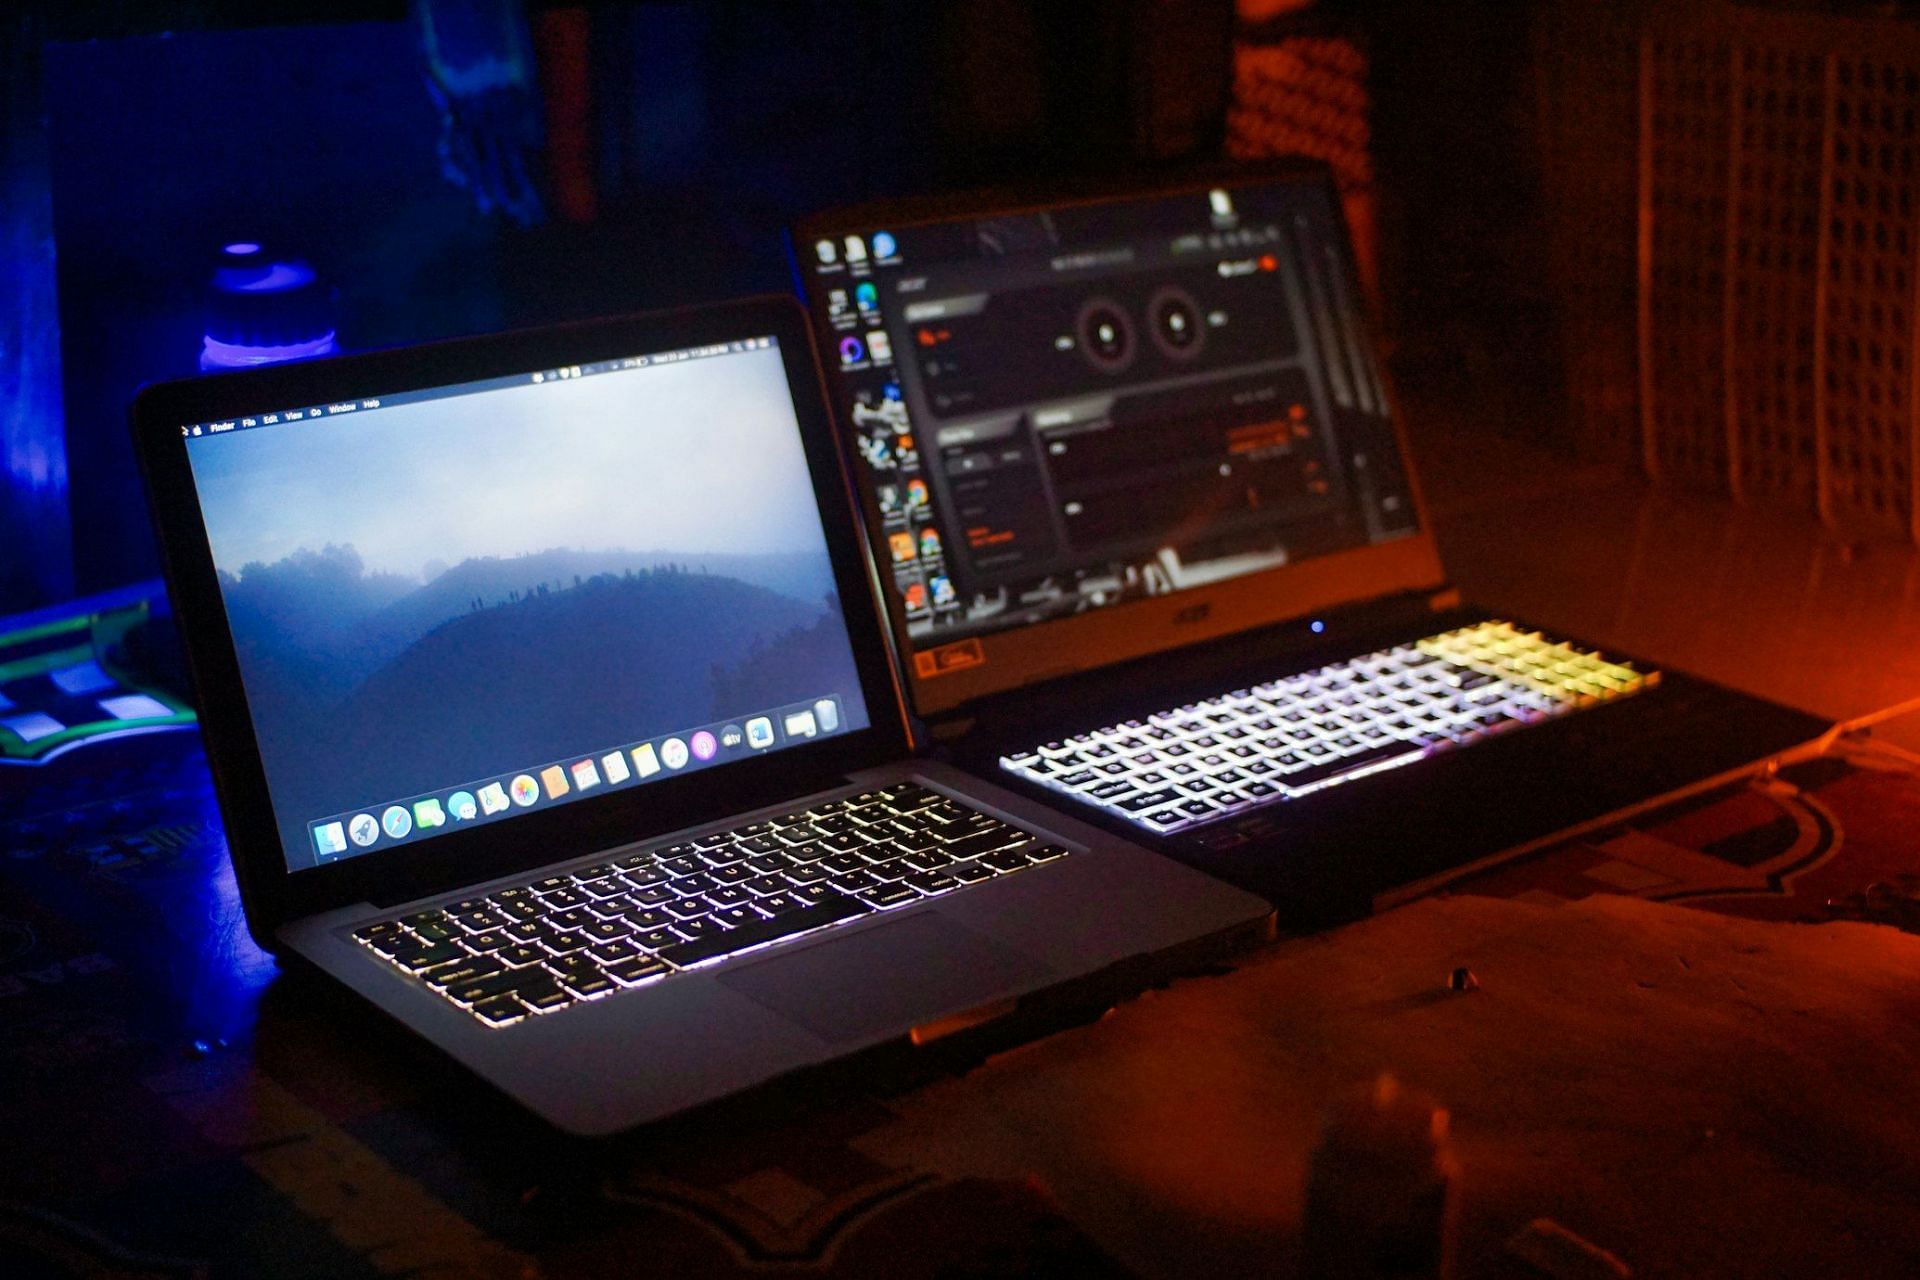 Tweaking the settings can significantly improve performance on your new gaming laptop (Image via Unsplash/@visualbywahyu)